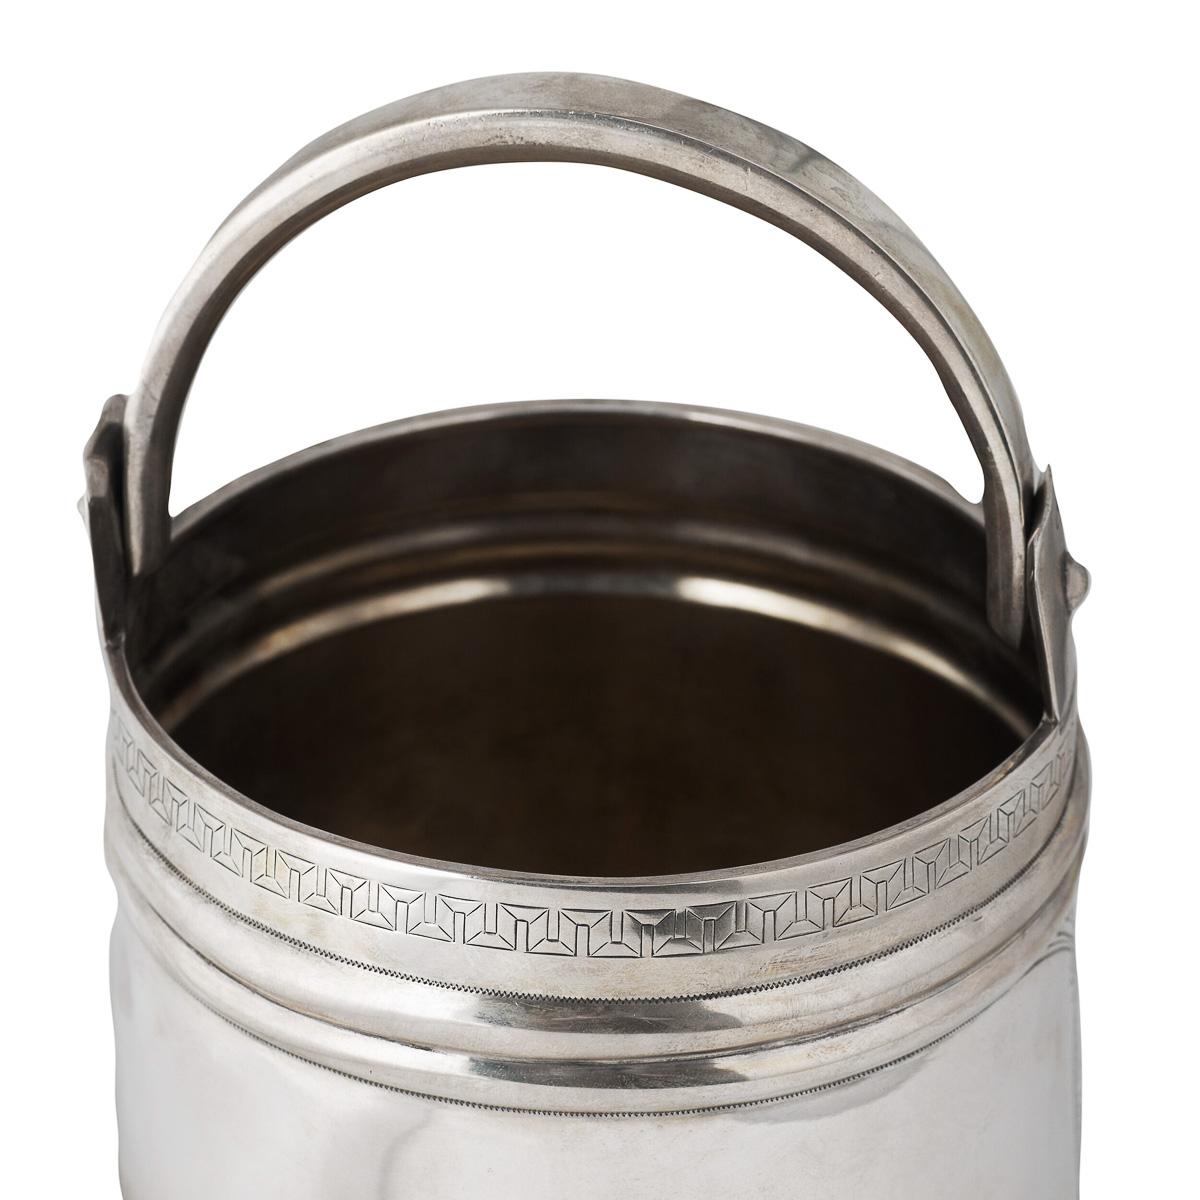 Antique 19th century Imperial Russian solid silver large ice pail, big enough for a bottle of vodka, bucket shaped with swinging handle, strap work along the top and bottom, with stylized boarders and blasted matte body. Hallmarked Russian silver 84